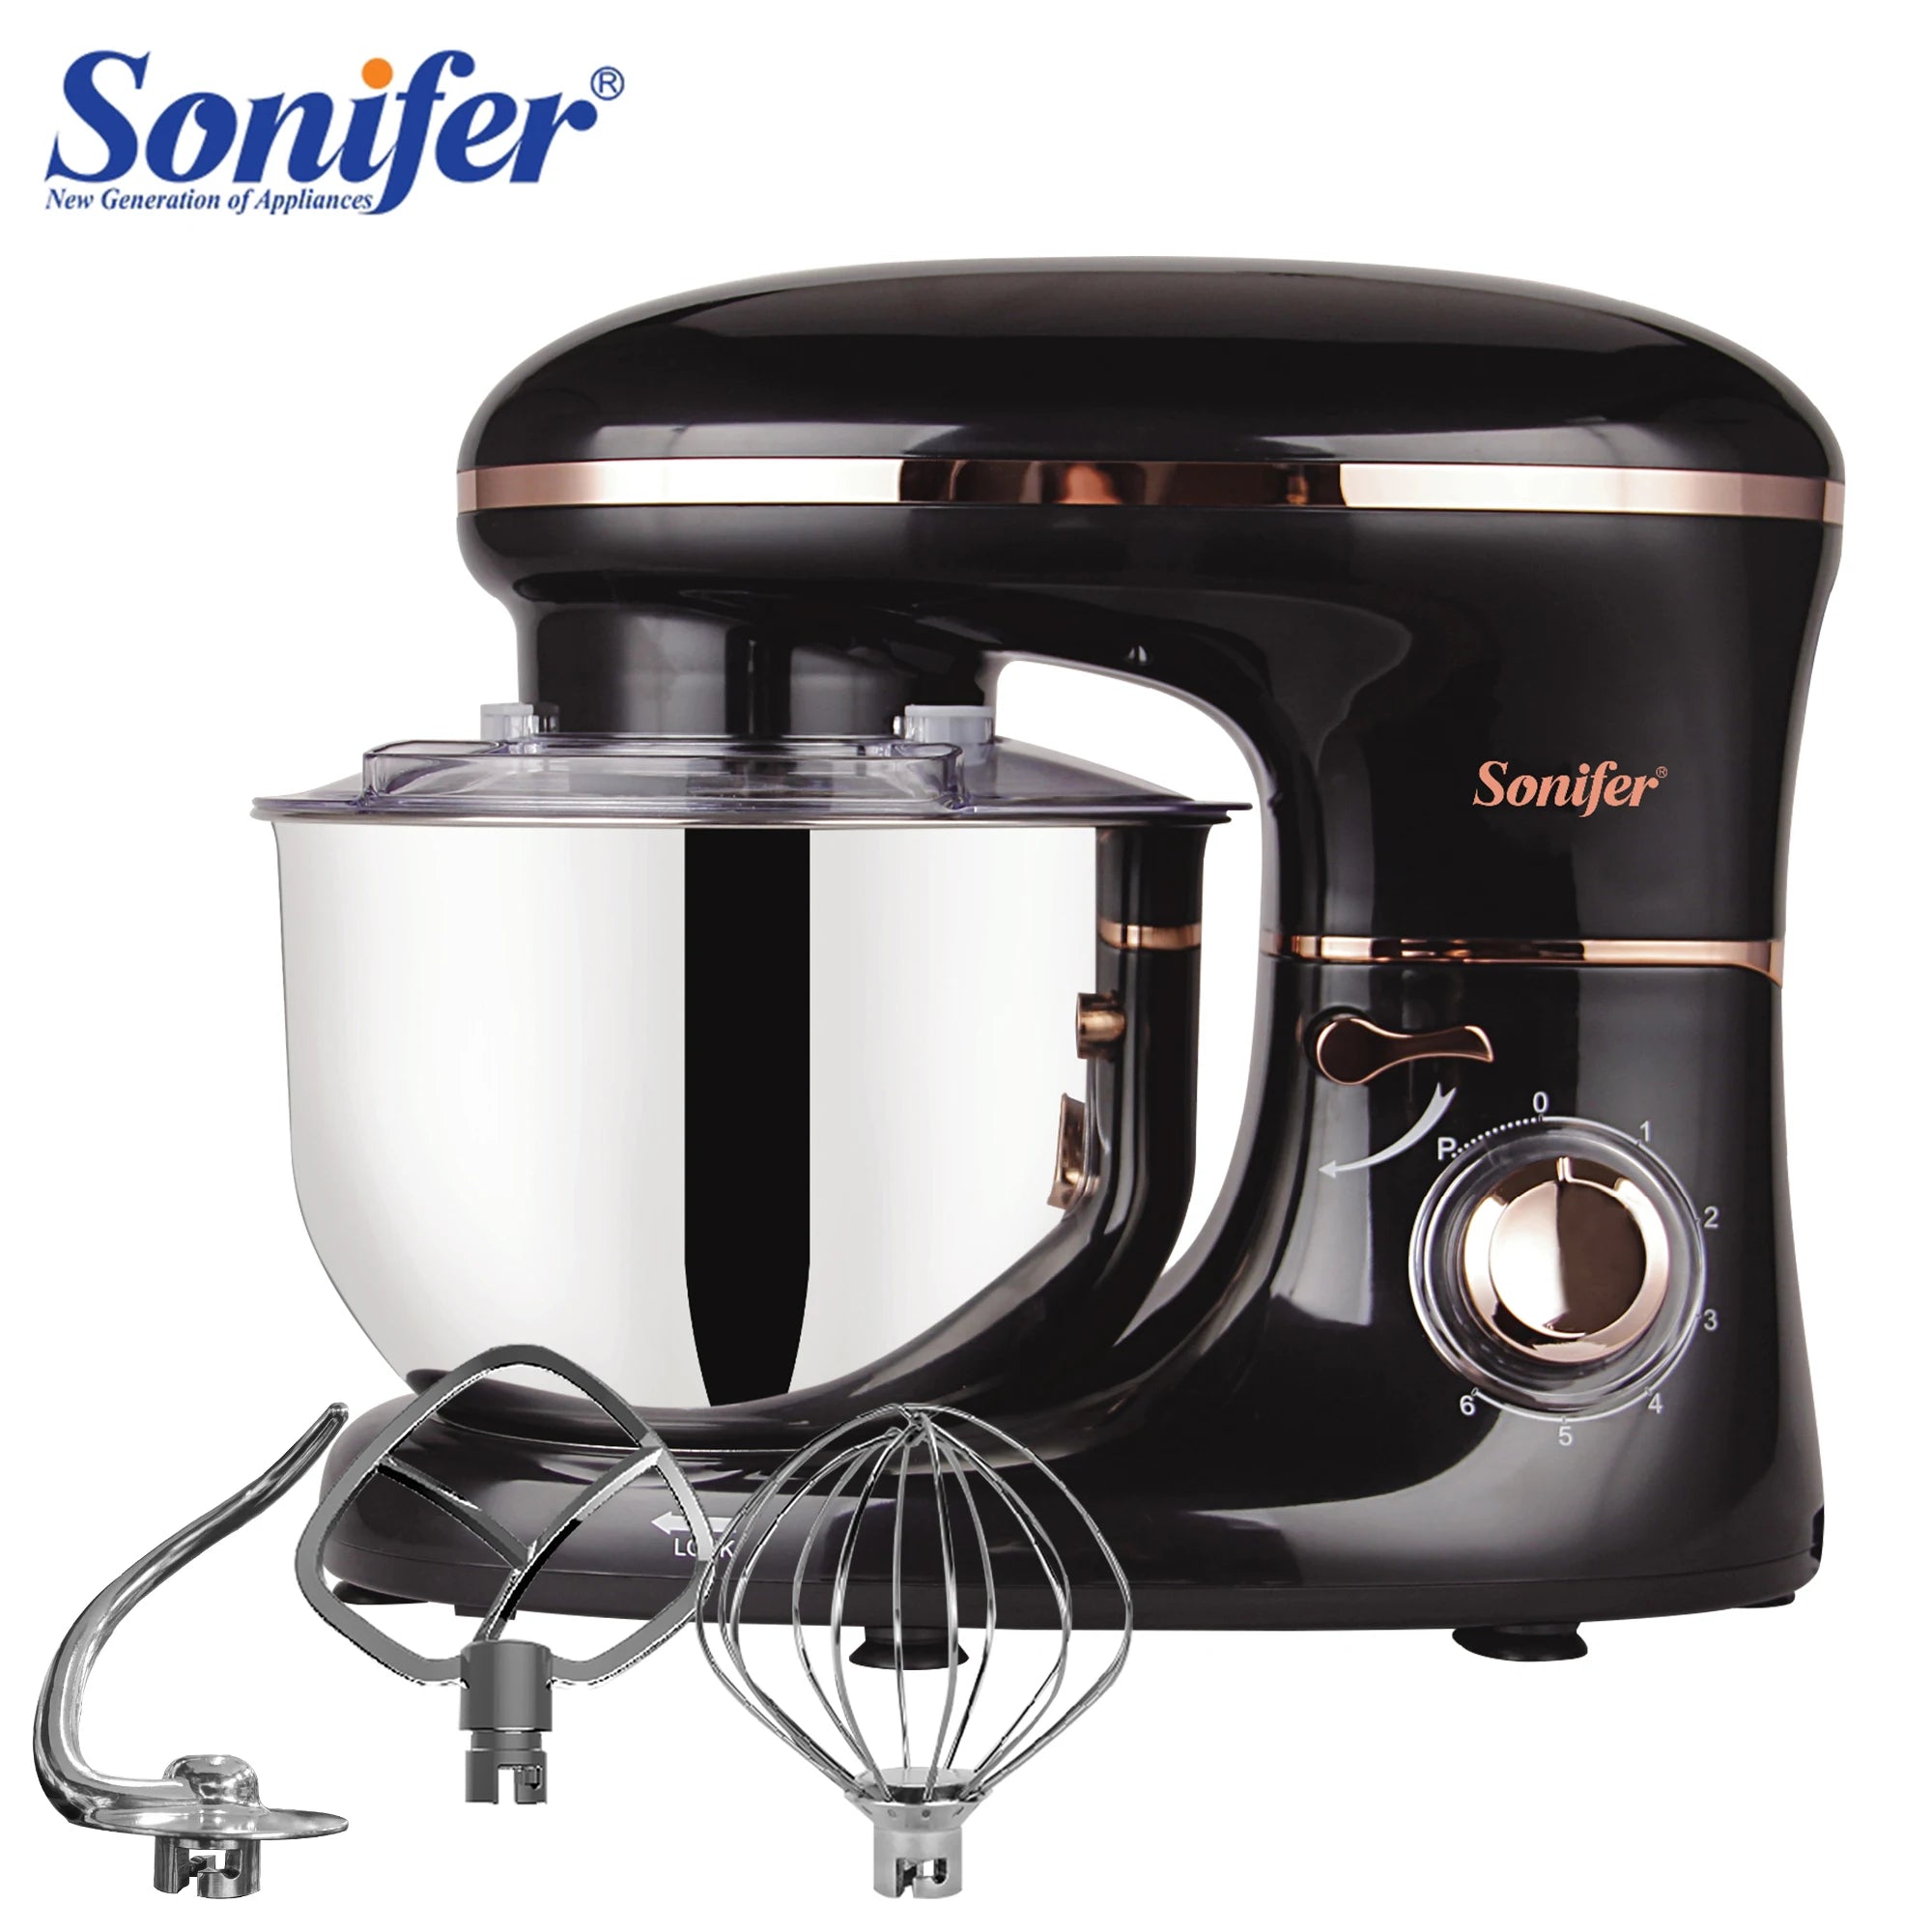 Stand Mixer Professional Kitchen Aid Food Blender Cream Whisk Cake Dough Mixers With Bowl Metal Gear Chef Machine Charm Sonifer